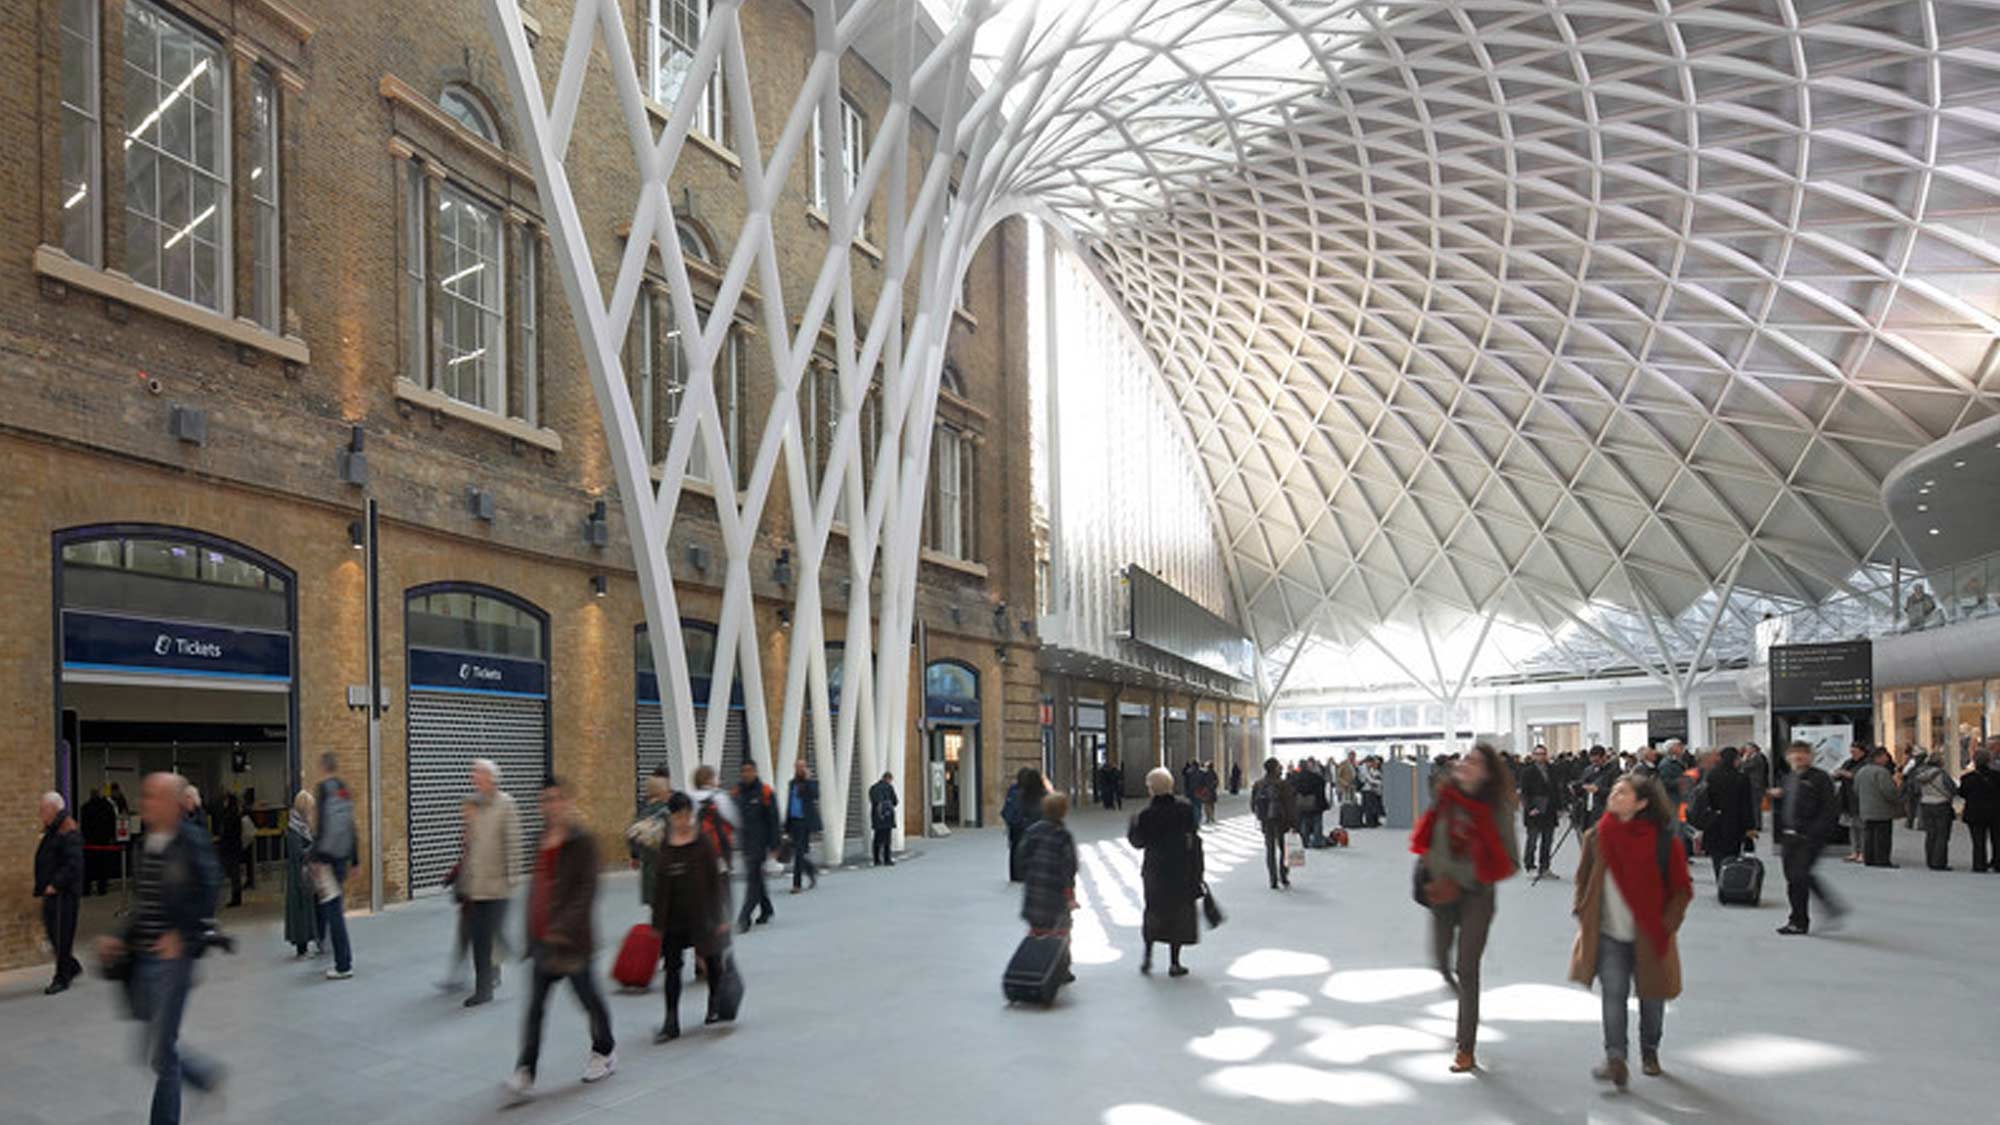 The historic King’s Cross Station was restored and redeveloped